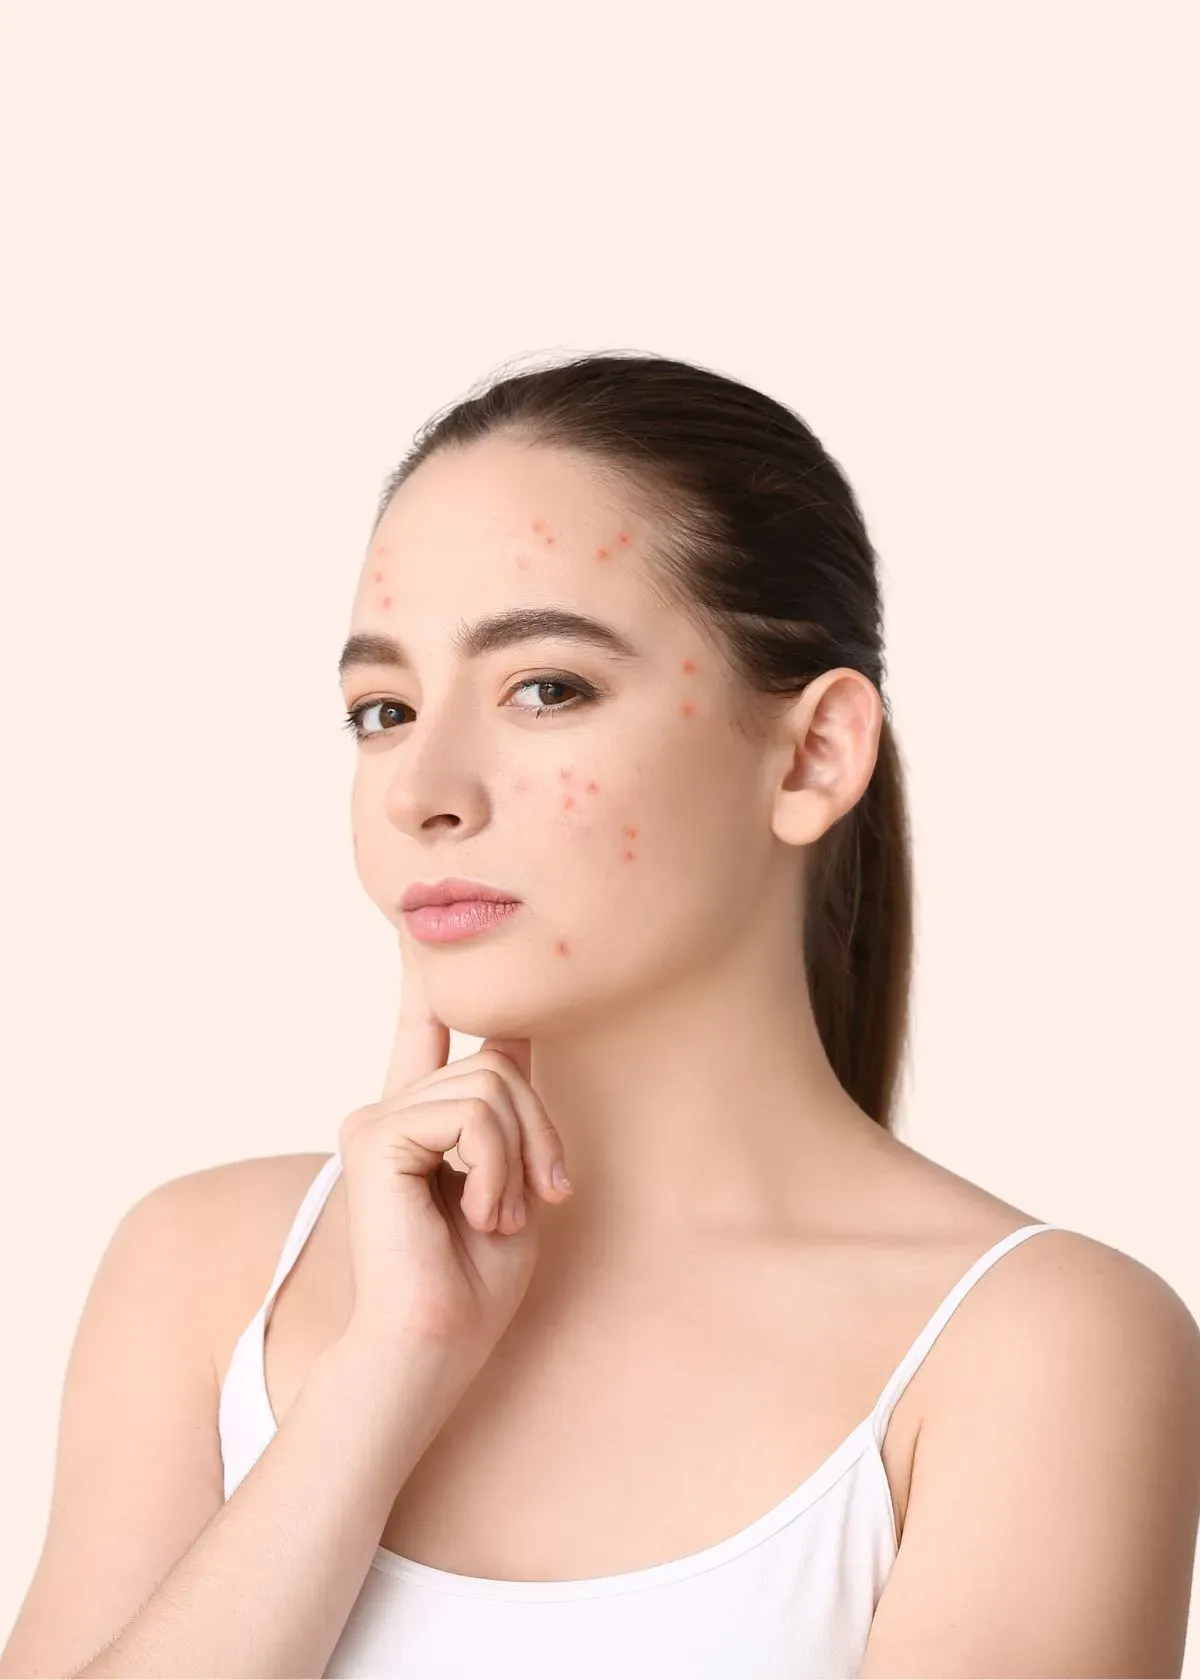 Foundation Tips For Acne: How to Achieve a Clear, Smooth Complexion